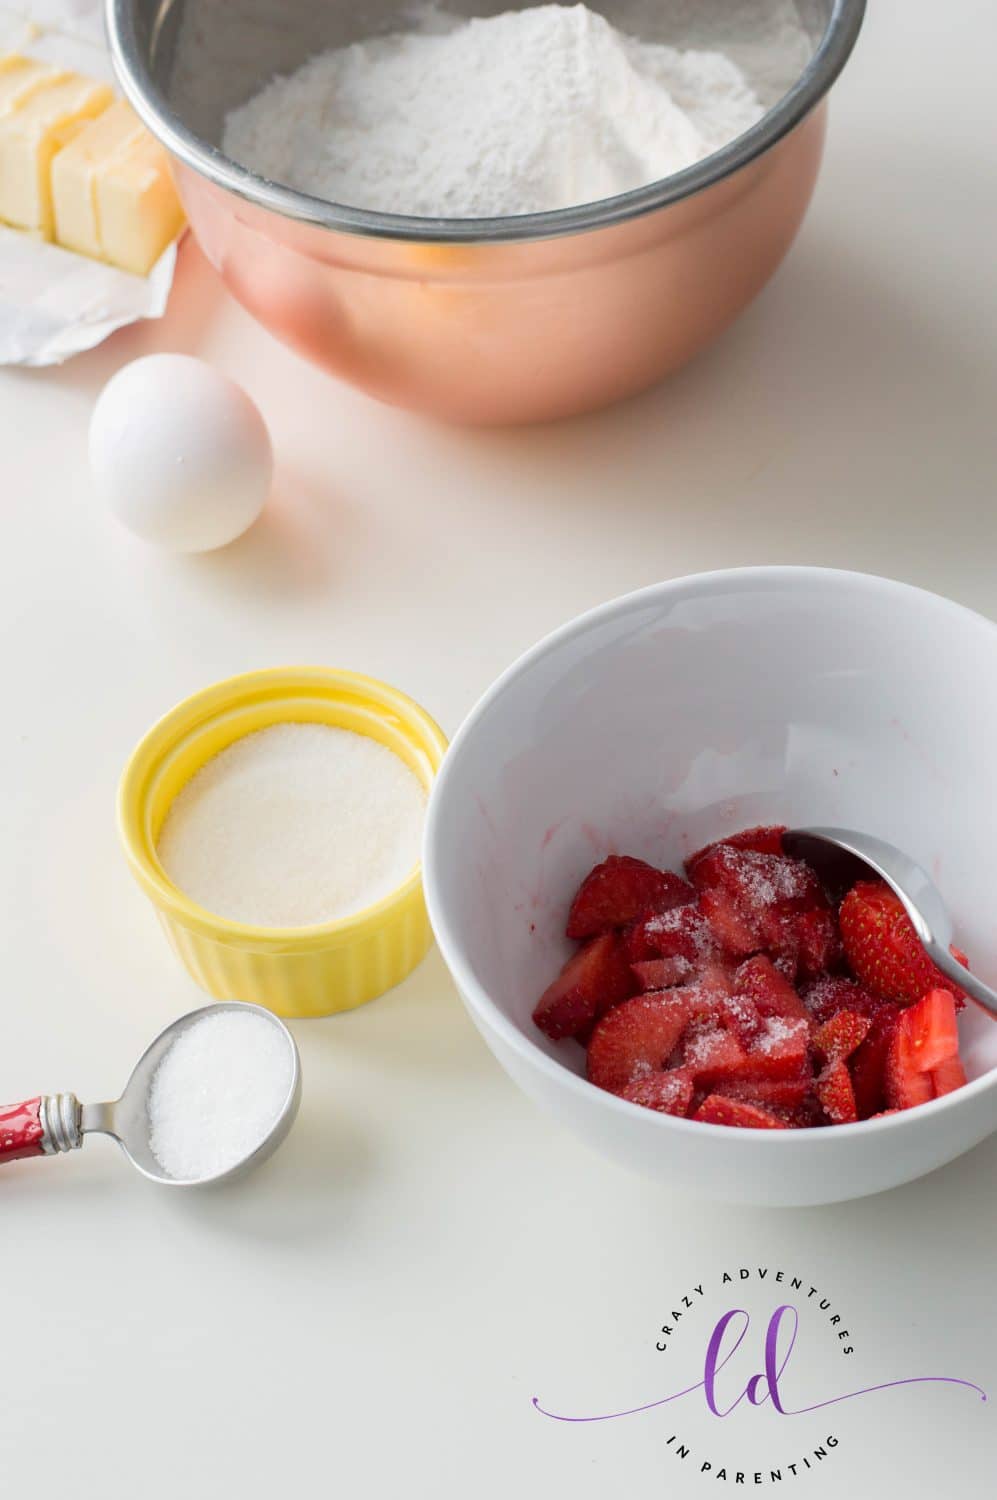 Pour Sugar over Strawberries for Strawberry Scones